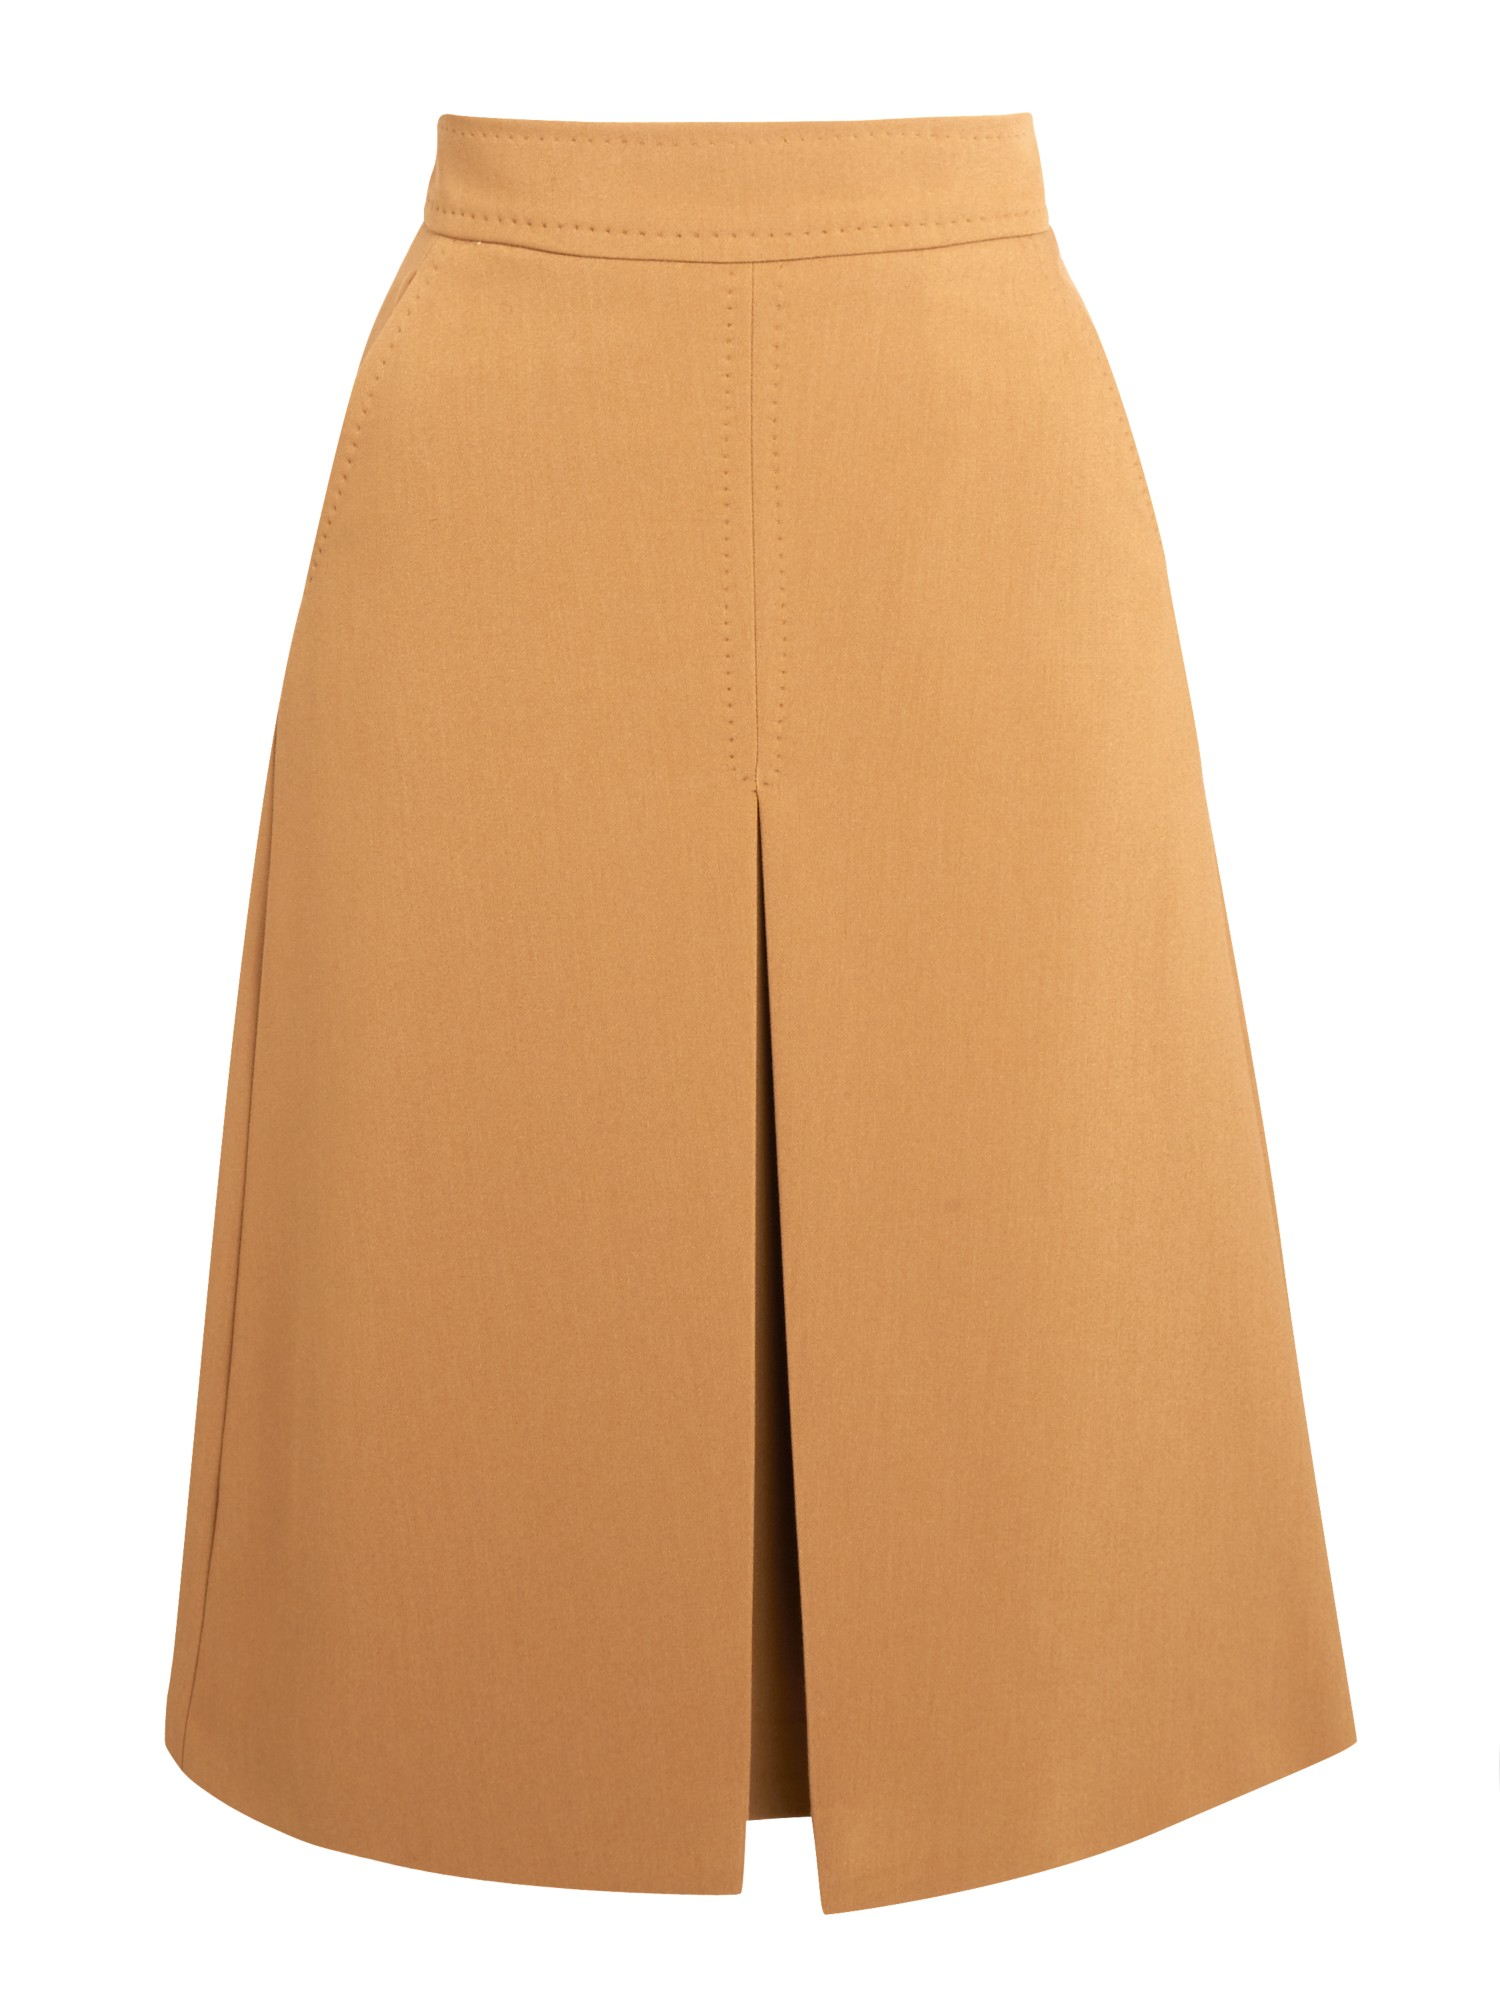 Lyst - Marella Arena Inverted Pleat Skirt in Natural